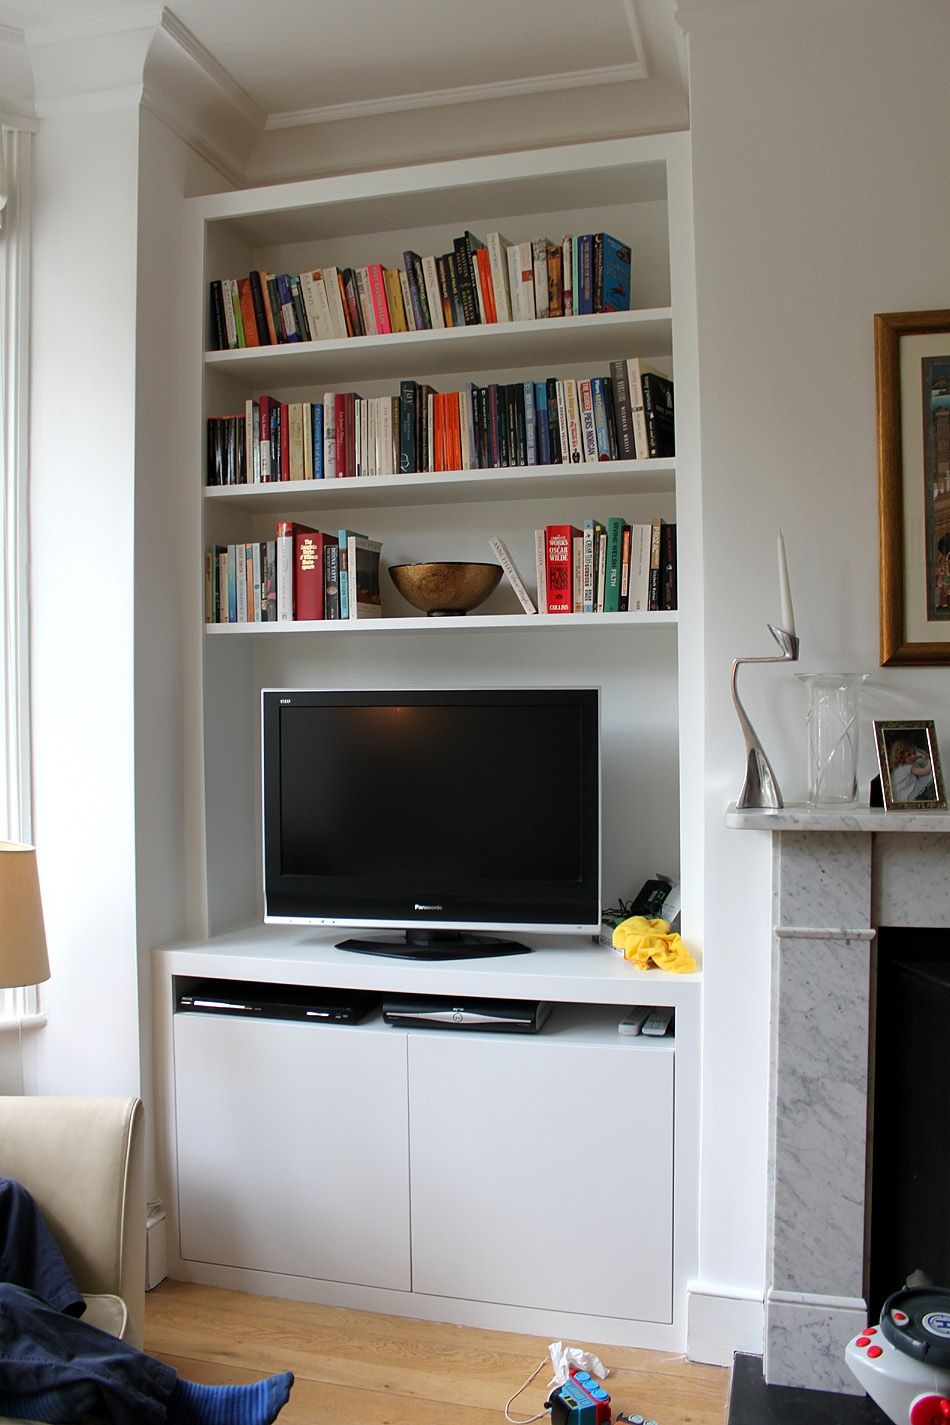 Fitted Wardrobes Bookcases Shelving Floating Shelves London Throughout Tv And Bookcase Units (View 9 of 15)